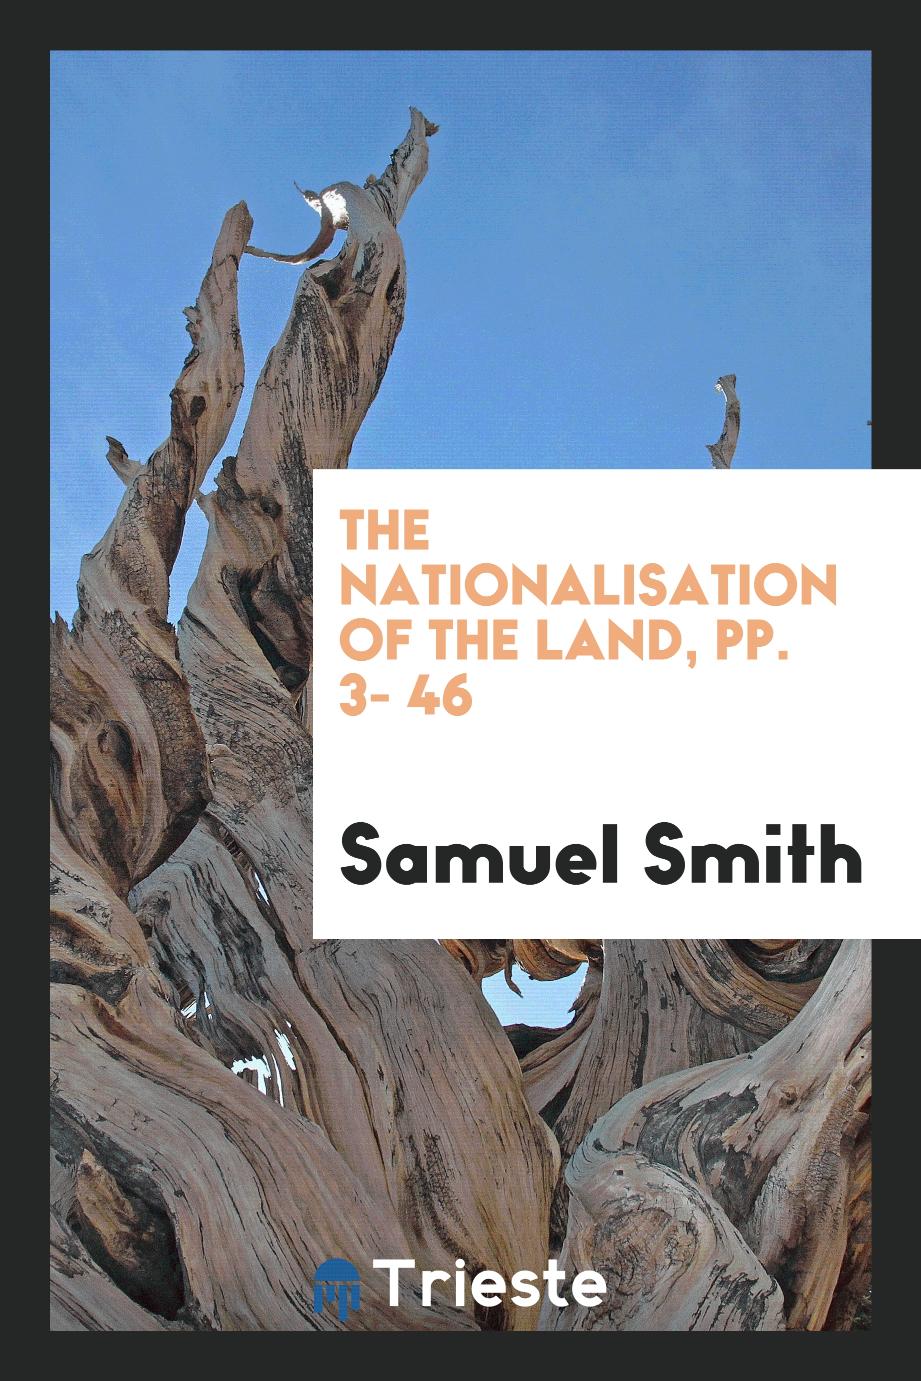 The Nationalisation of the Land, pp. 3- 46